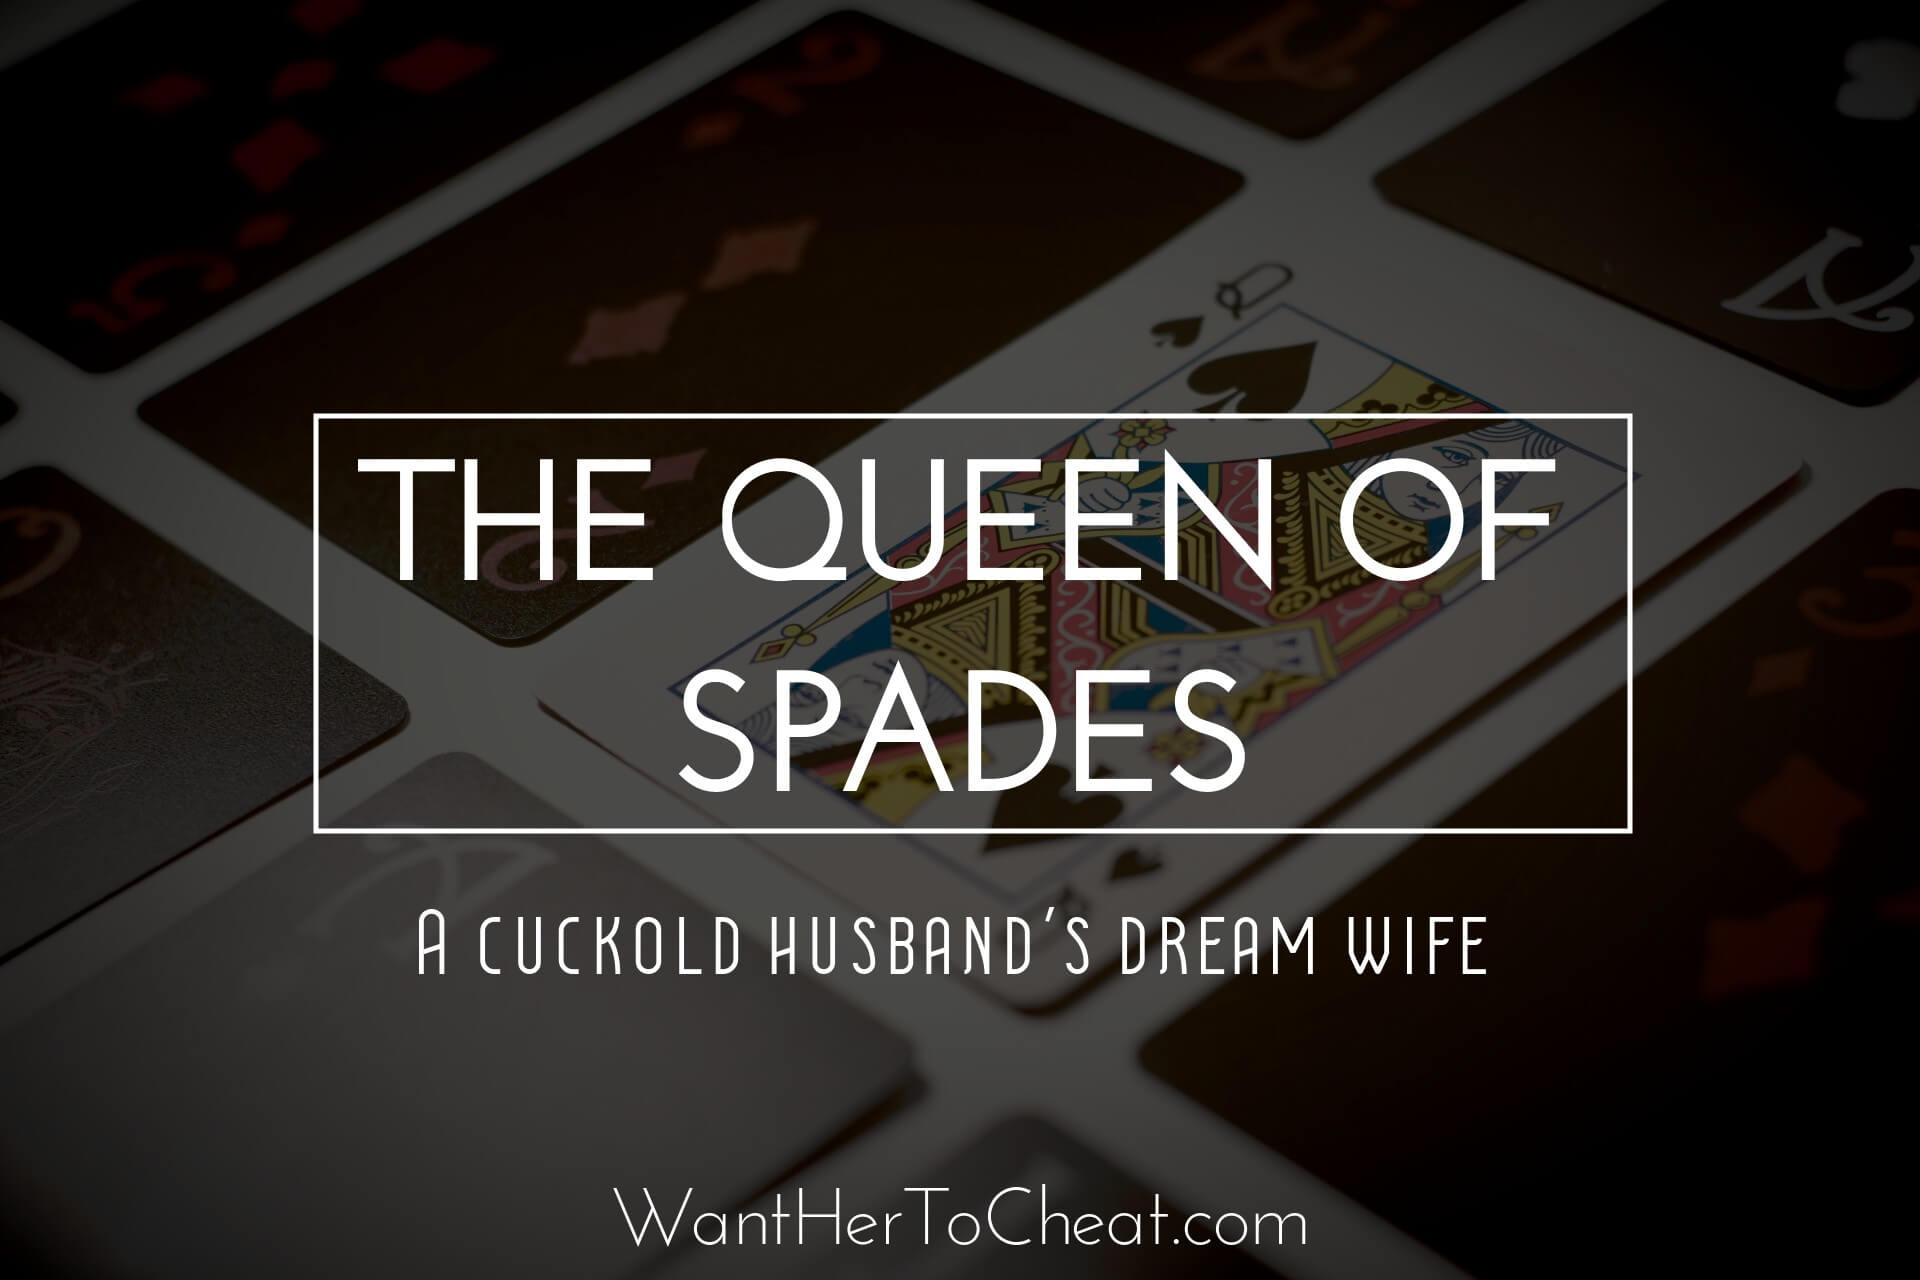 Queen of Spades: The married woman who became an interracial porn star for fun